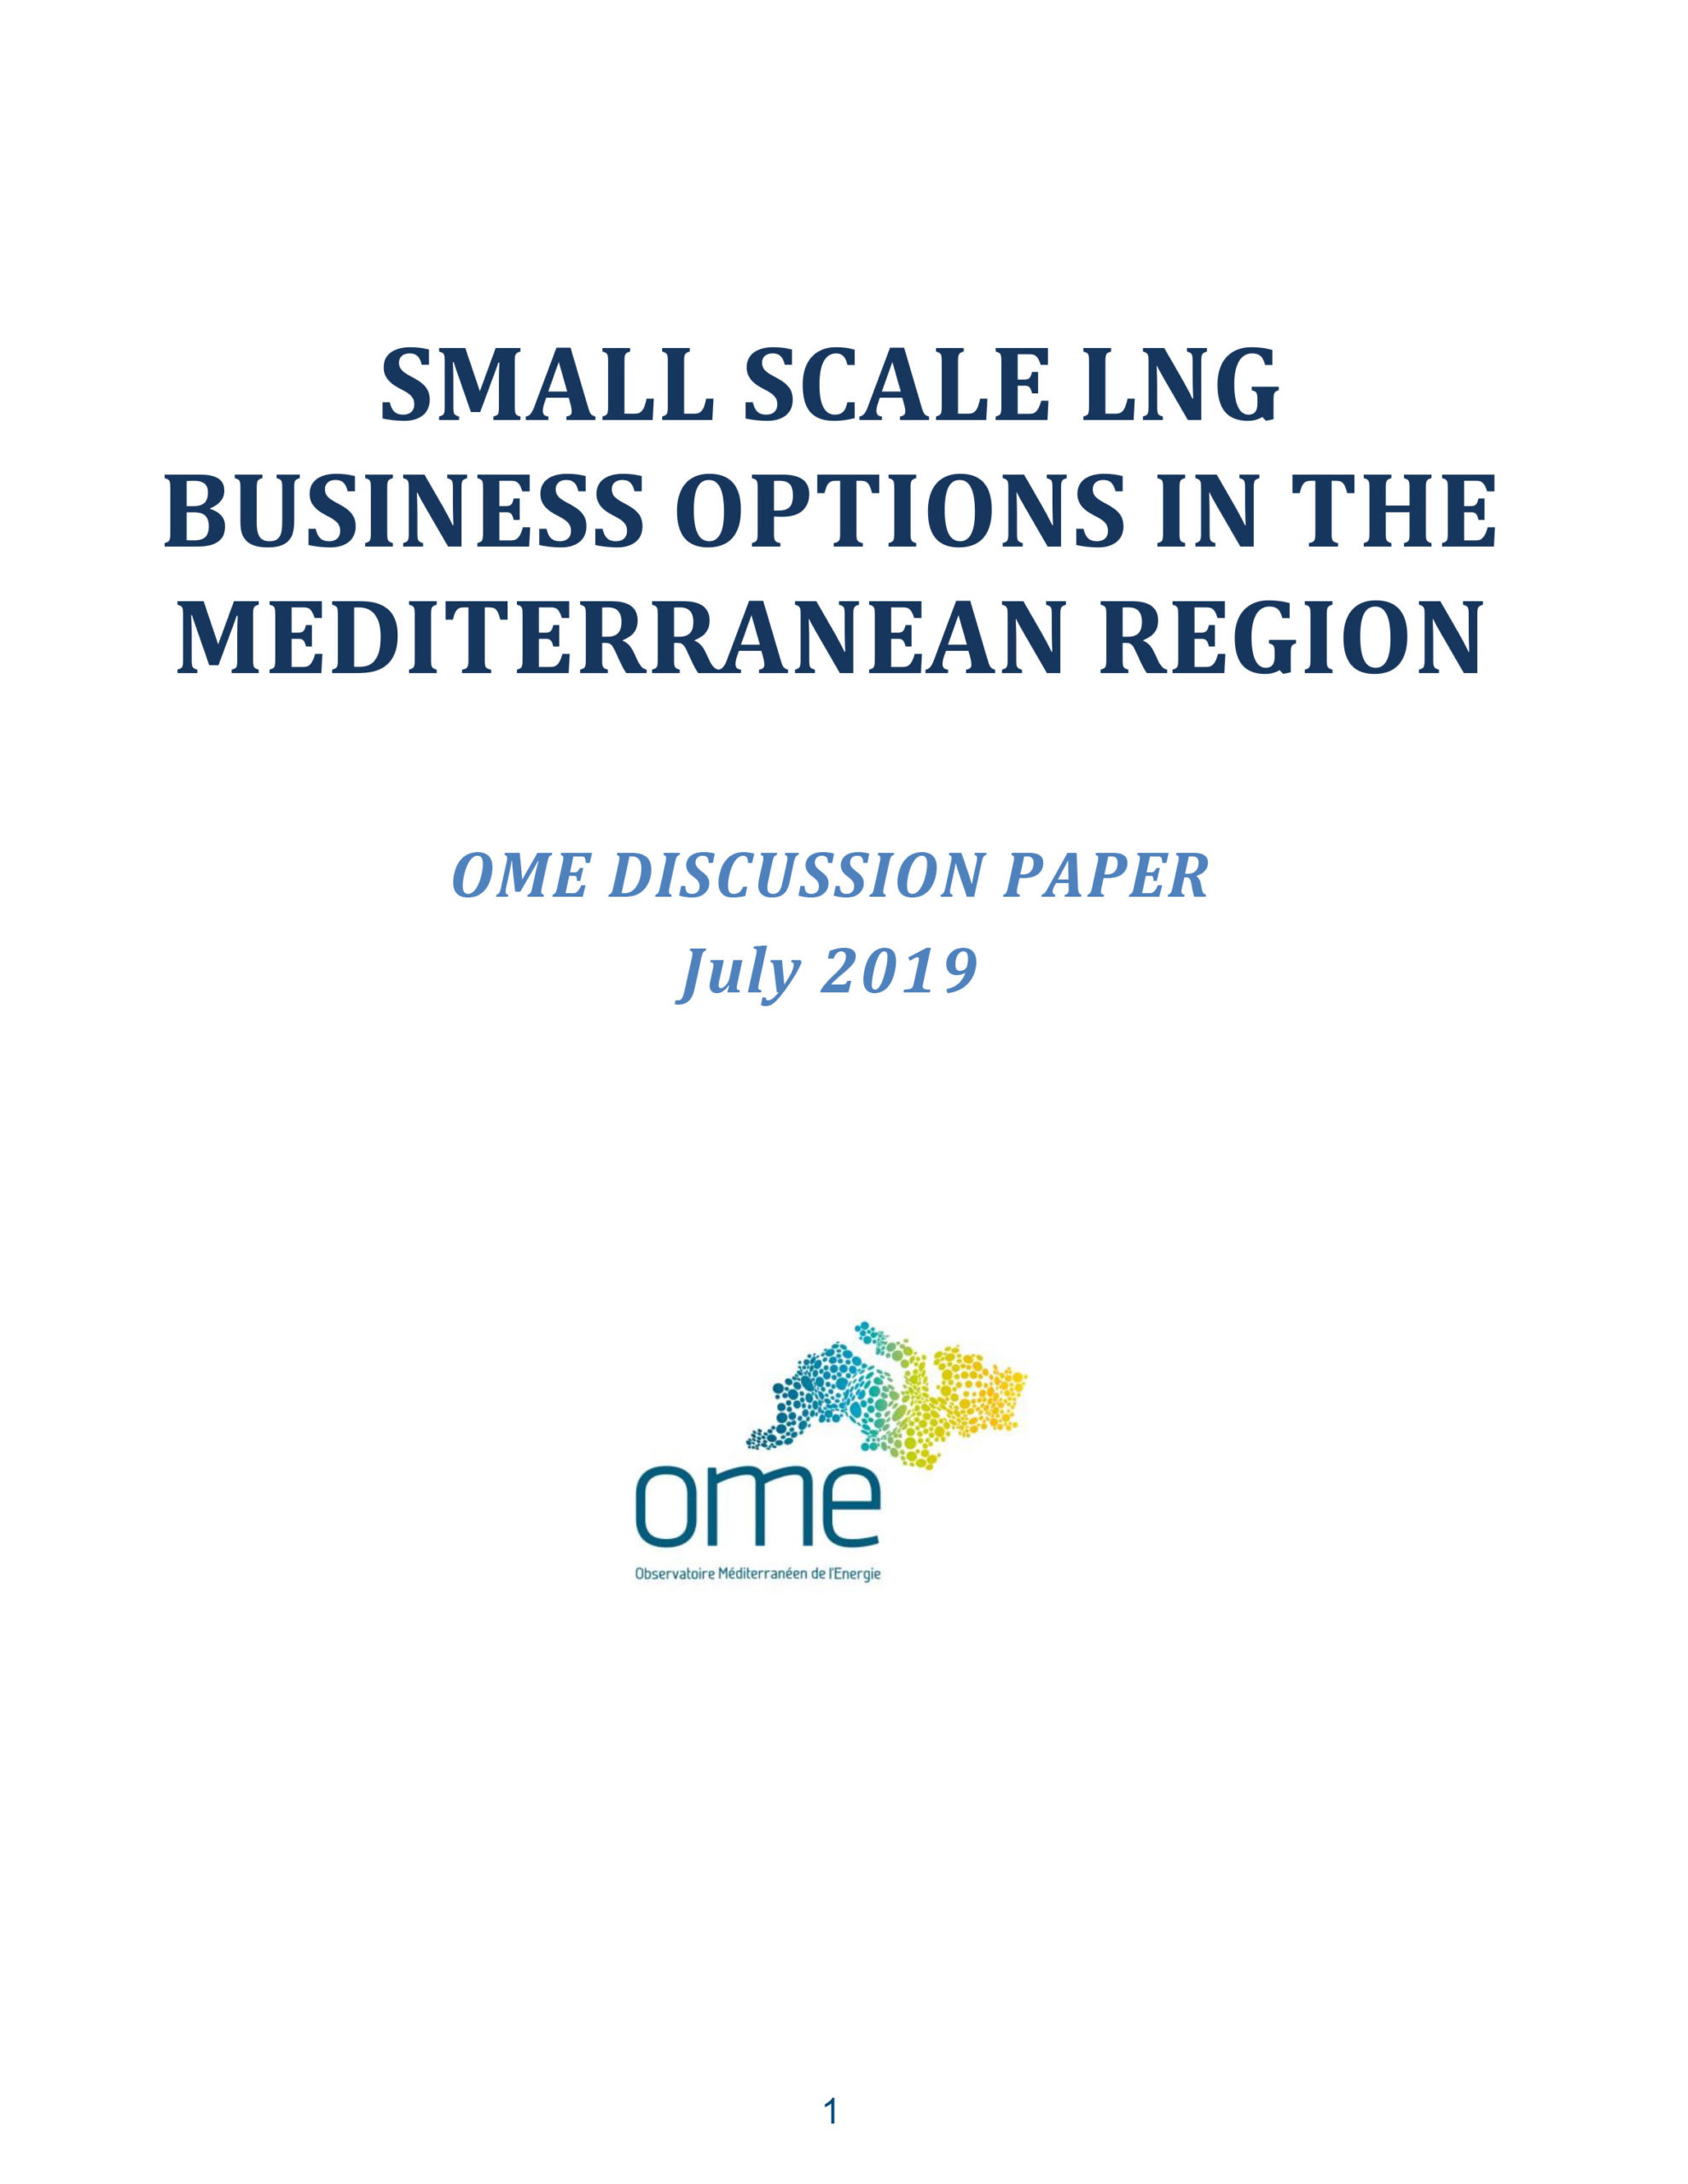 Small Scale LNG Business Options in the Mediterranean Region, July 2019